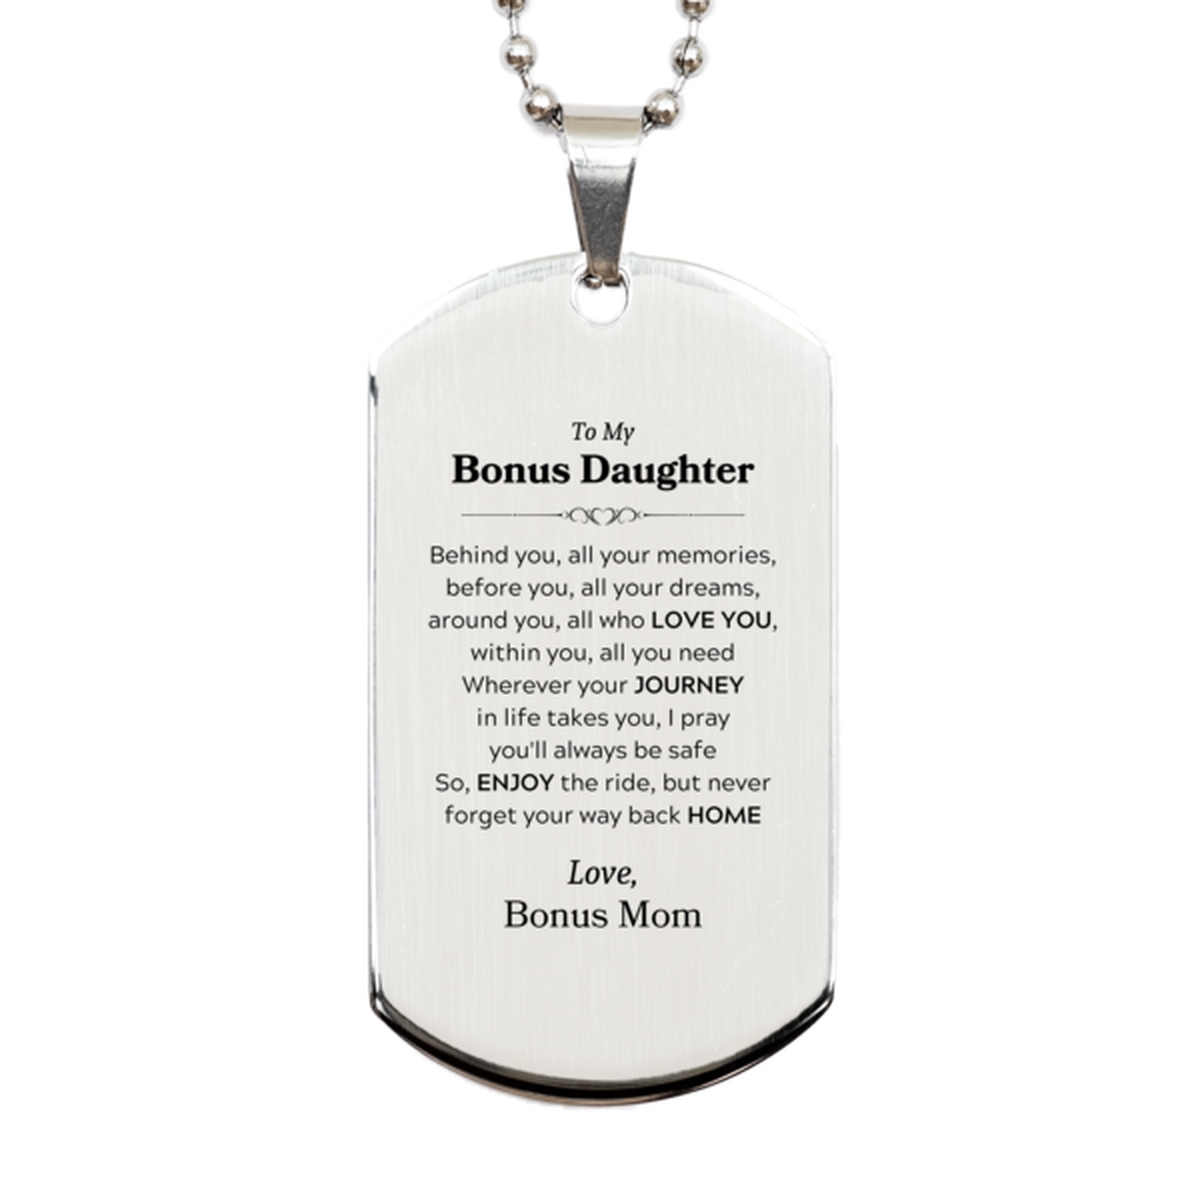 To My Bonus Daughter Graduation Gifts from Bonus Mom, Bonus Daughter Silver Dog Tag Christmas Birthday Gifts for Bonus Daughter Behind you, all your memories, before you, all your dreams. Love, Bonus Mom